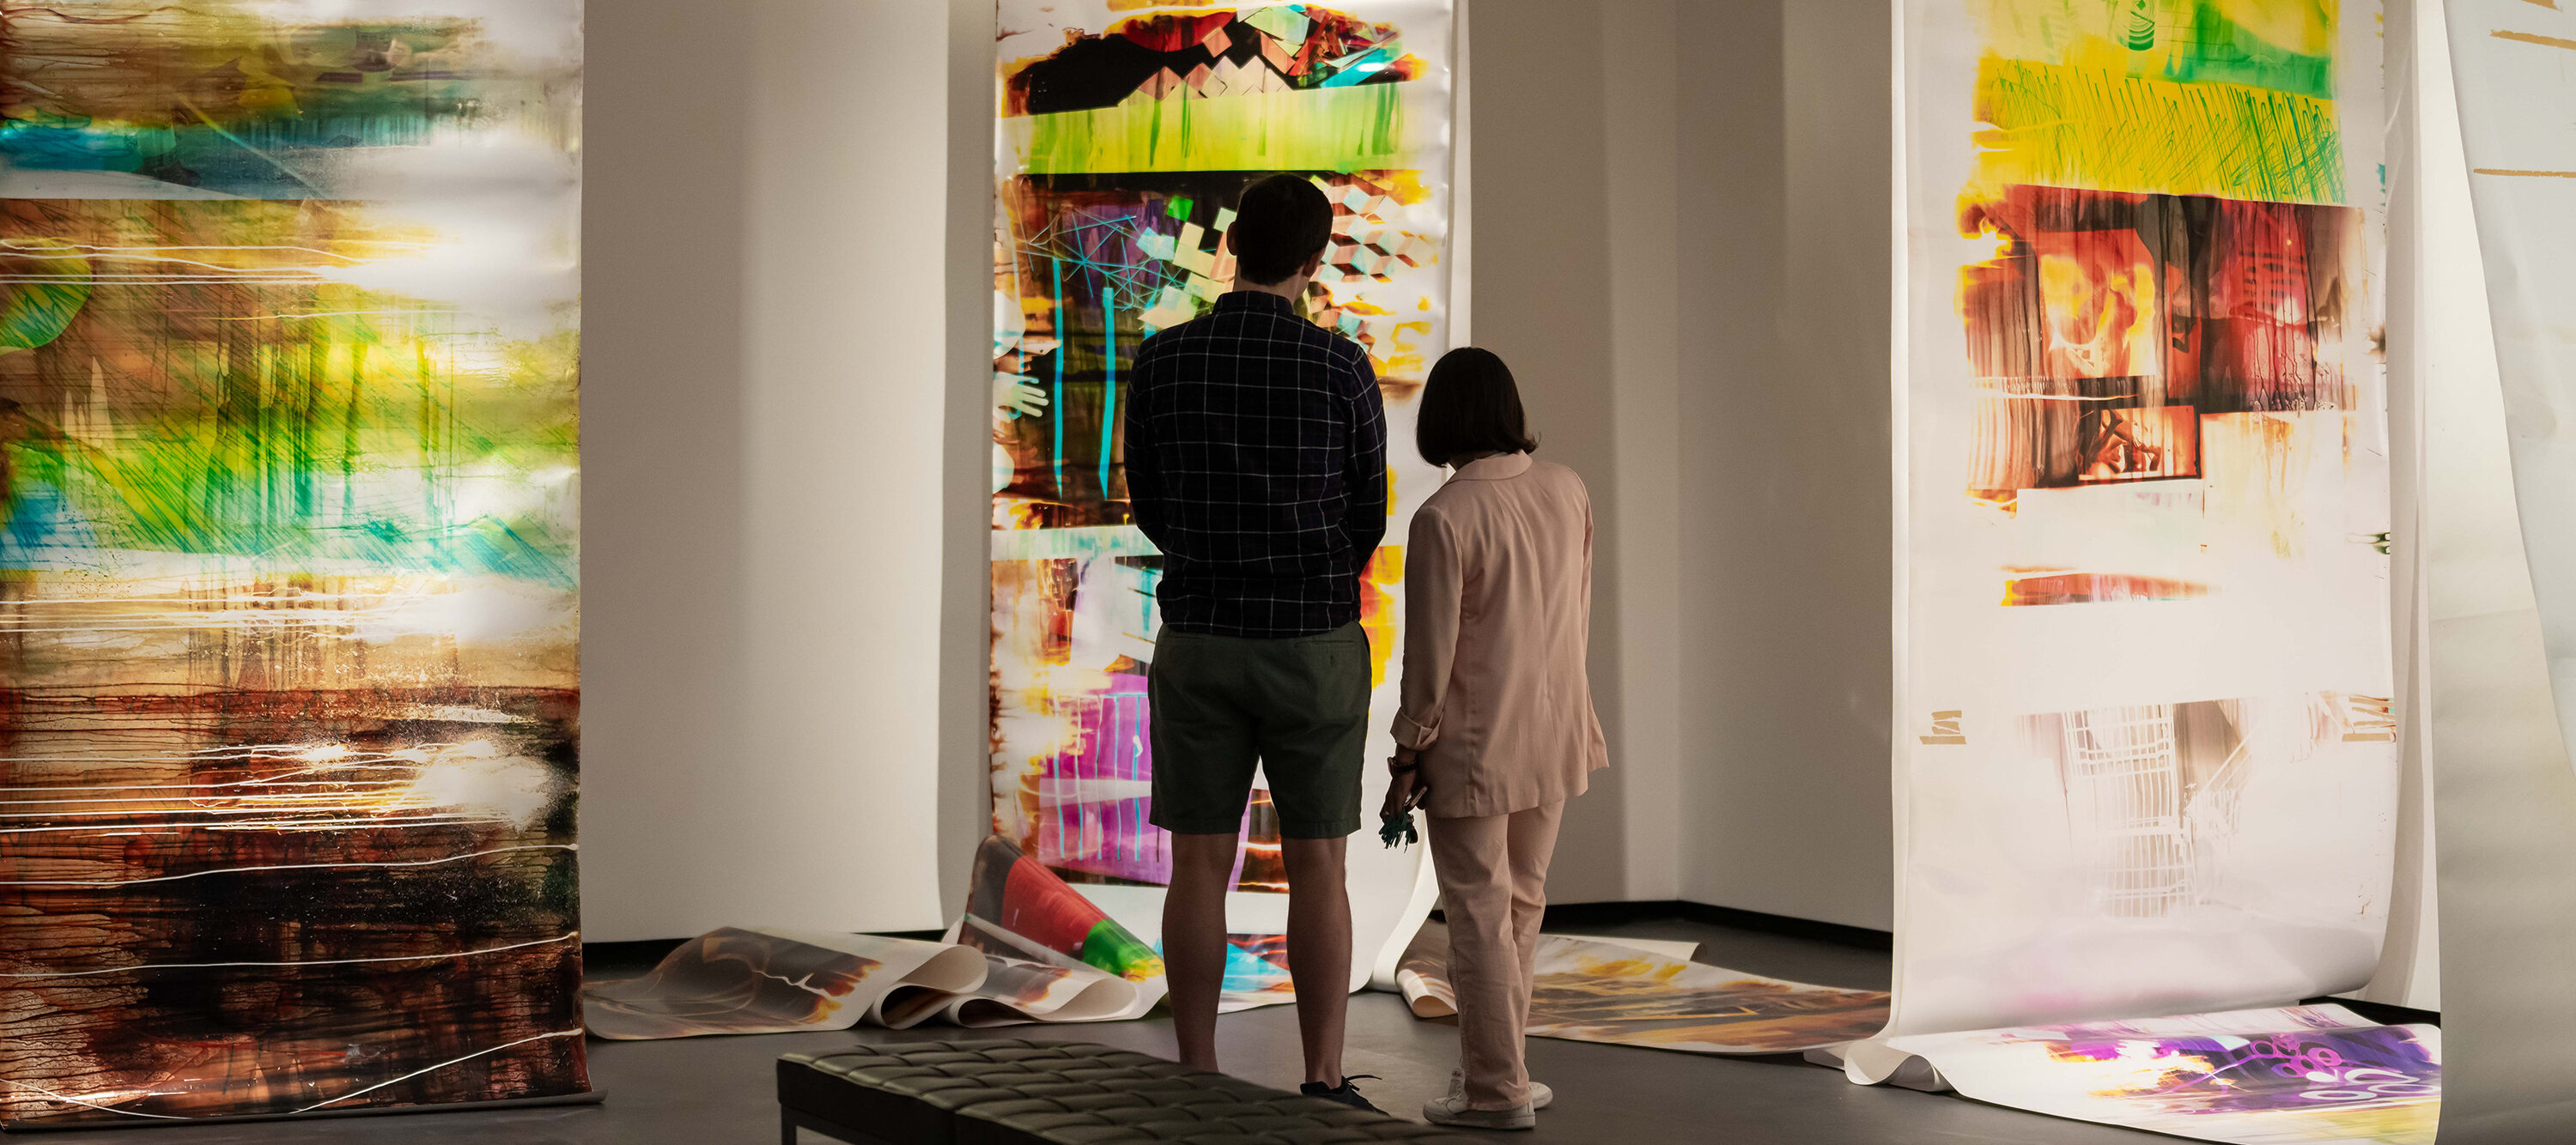 Two museum visitors are standing in front of an artwork. This large-scale, scrolling, colorful, abstract photograph is hung from the ceiling throughout the room.